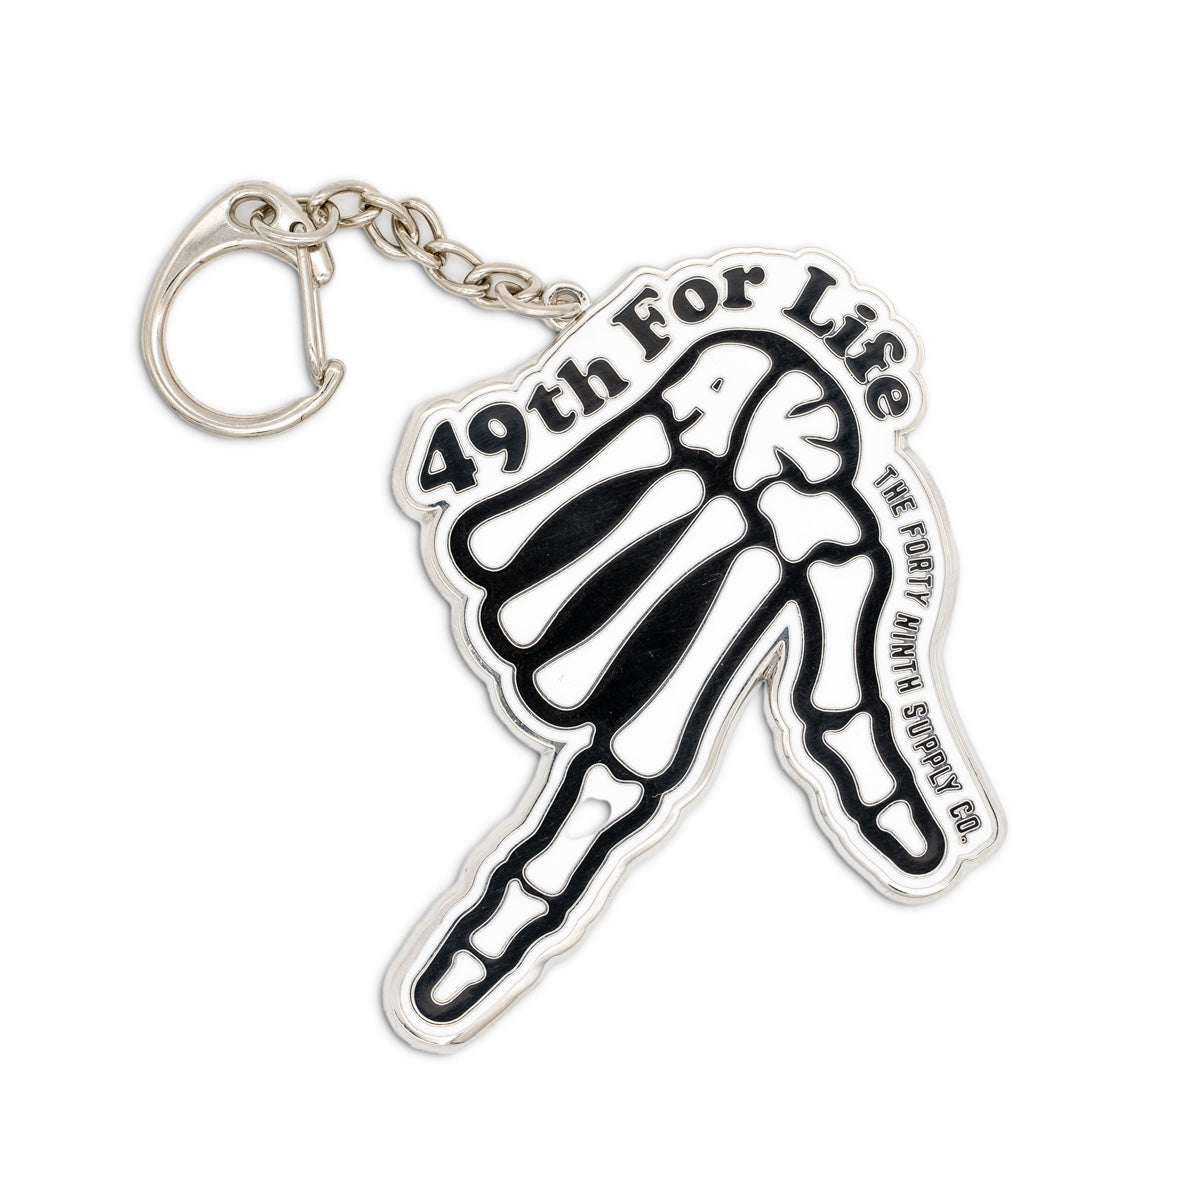 AK For Life Metal Keychain – The 49th Supply Co.